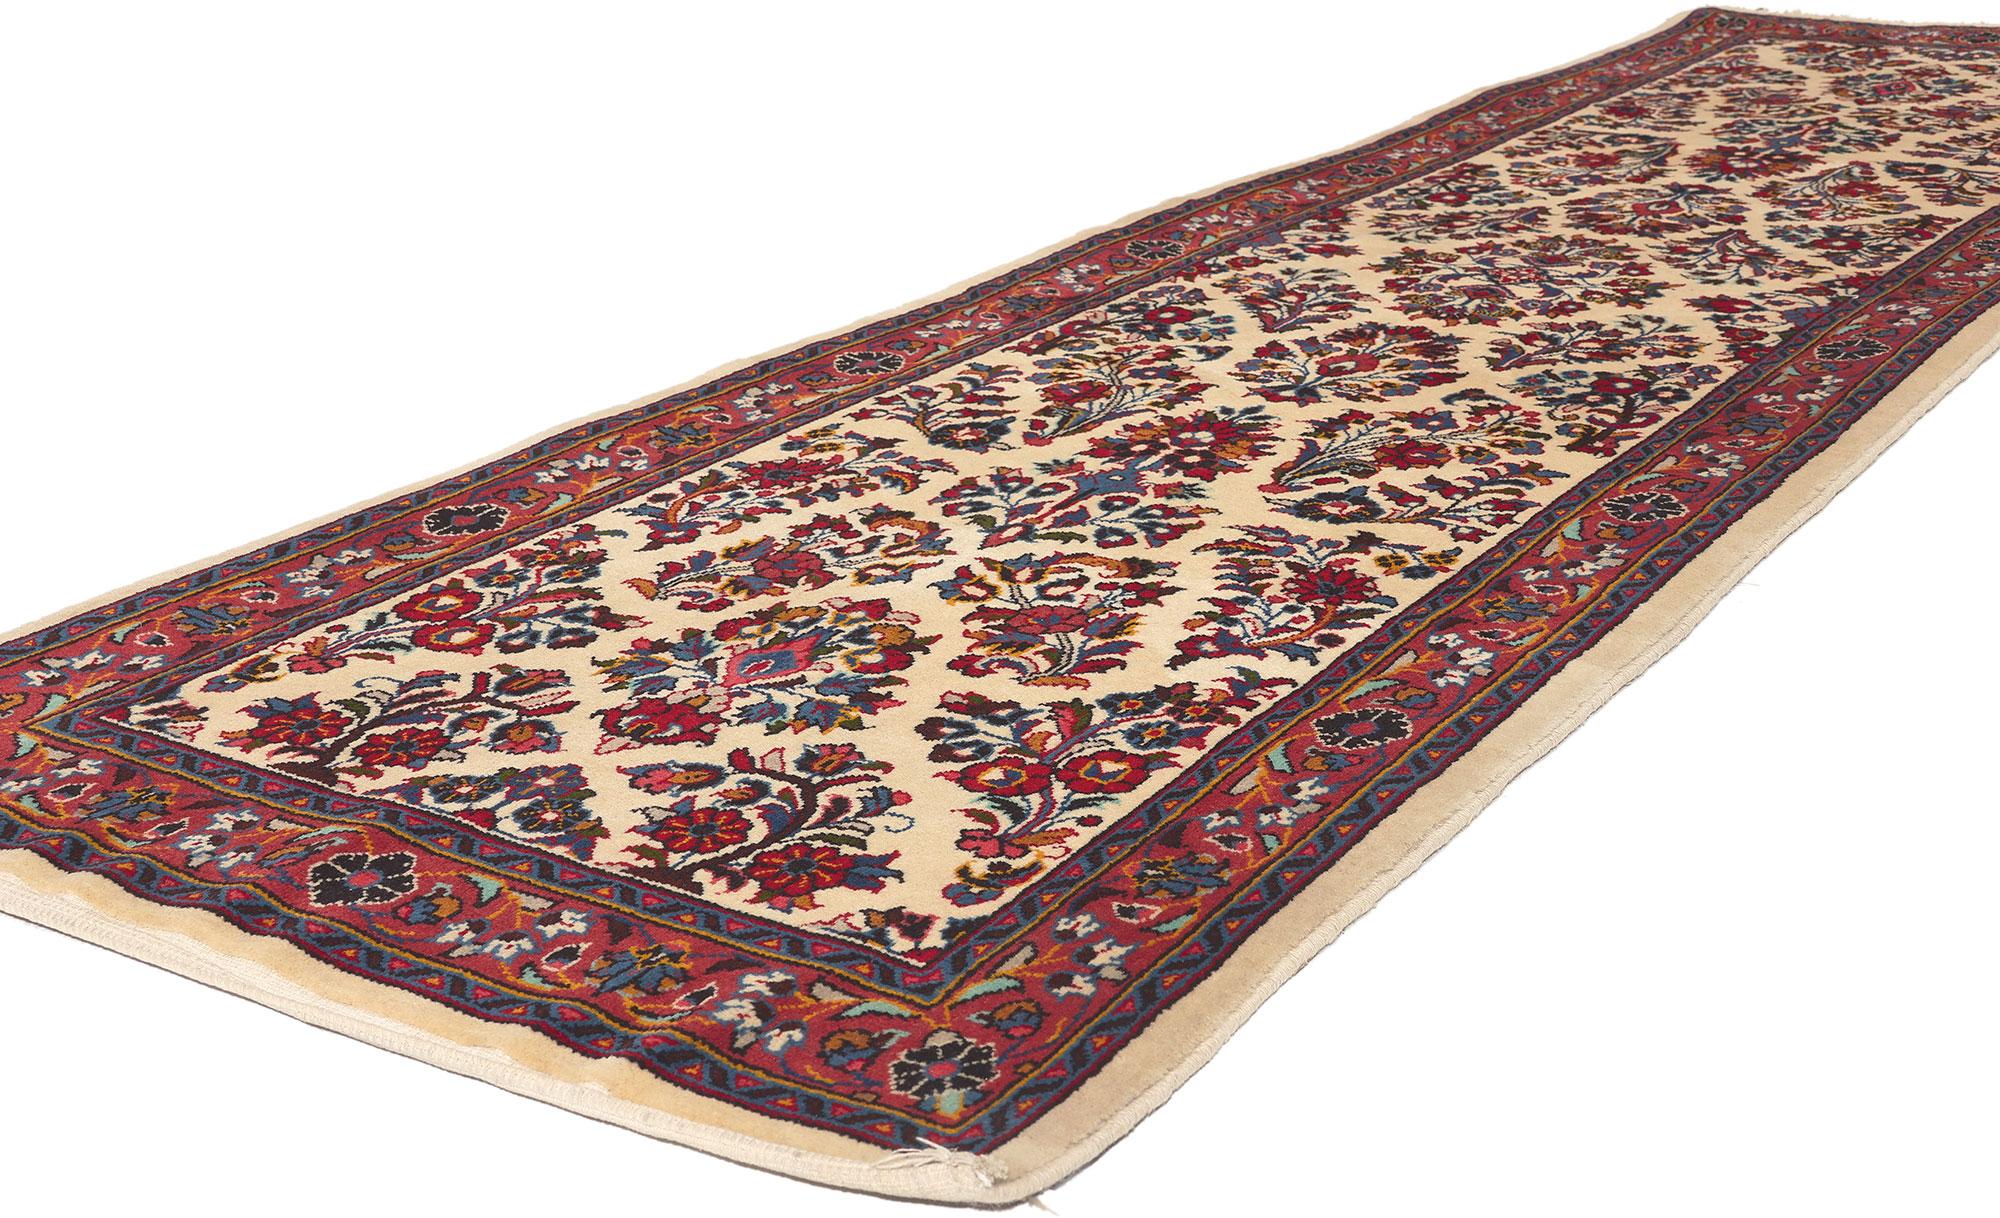 78634 Vintage Persian Sarouk Rug Runner, 02'09 x 09'10.
Stately decadence meets stylish durability in this hand knotted wool vintage Persian Sarouk rug. The naturalistic floral design and traditional color palette woven into this piece work together